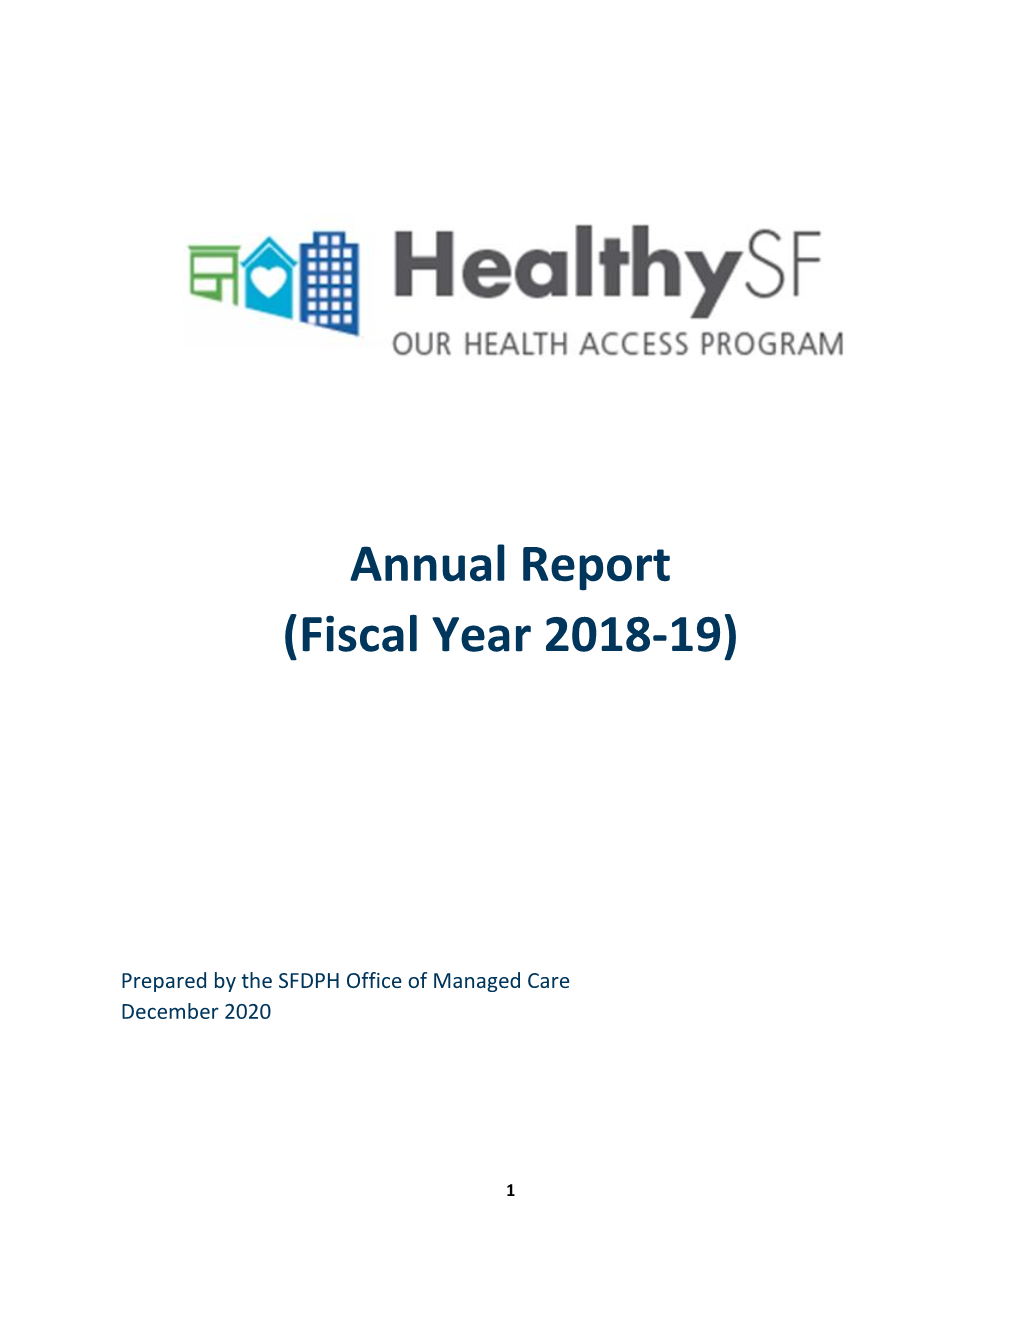 Annual Report (Fiscal Year 2018-19)